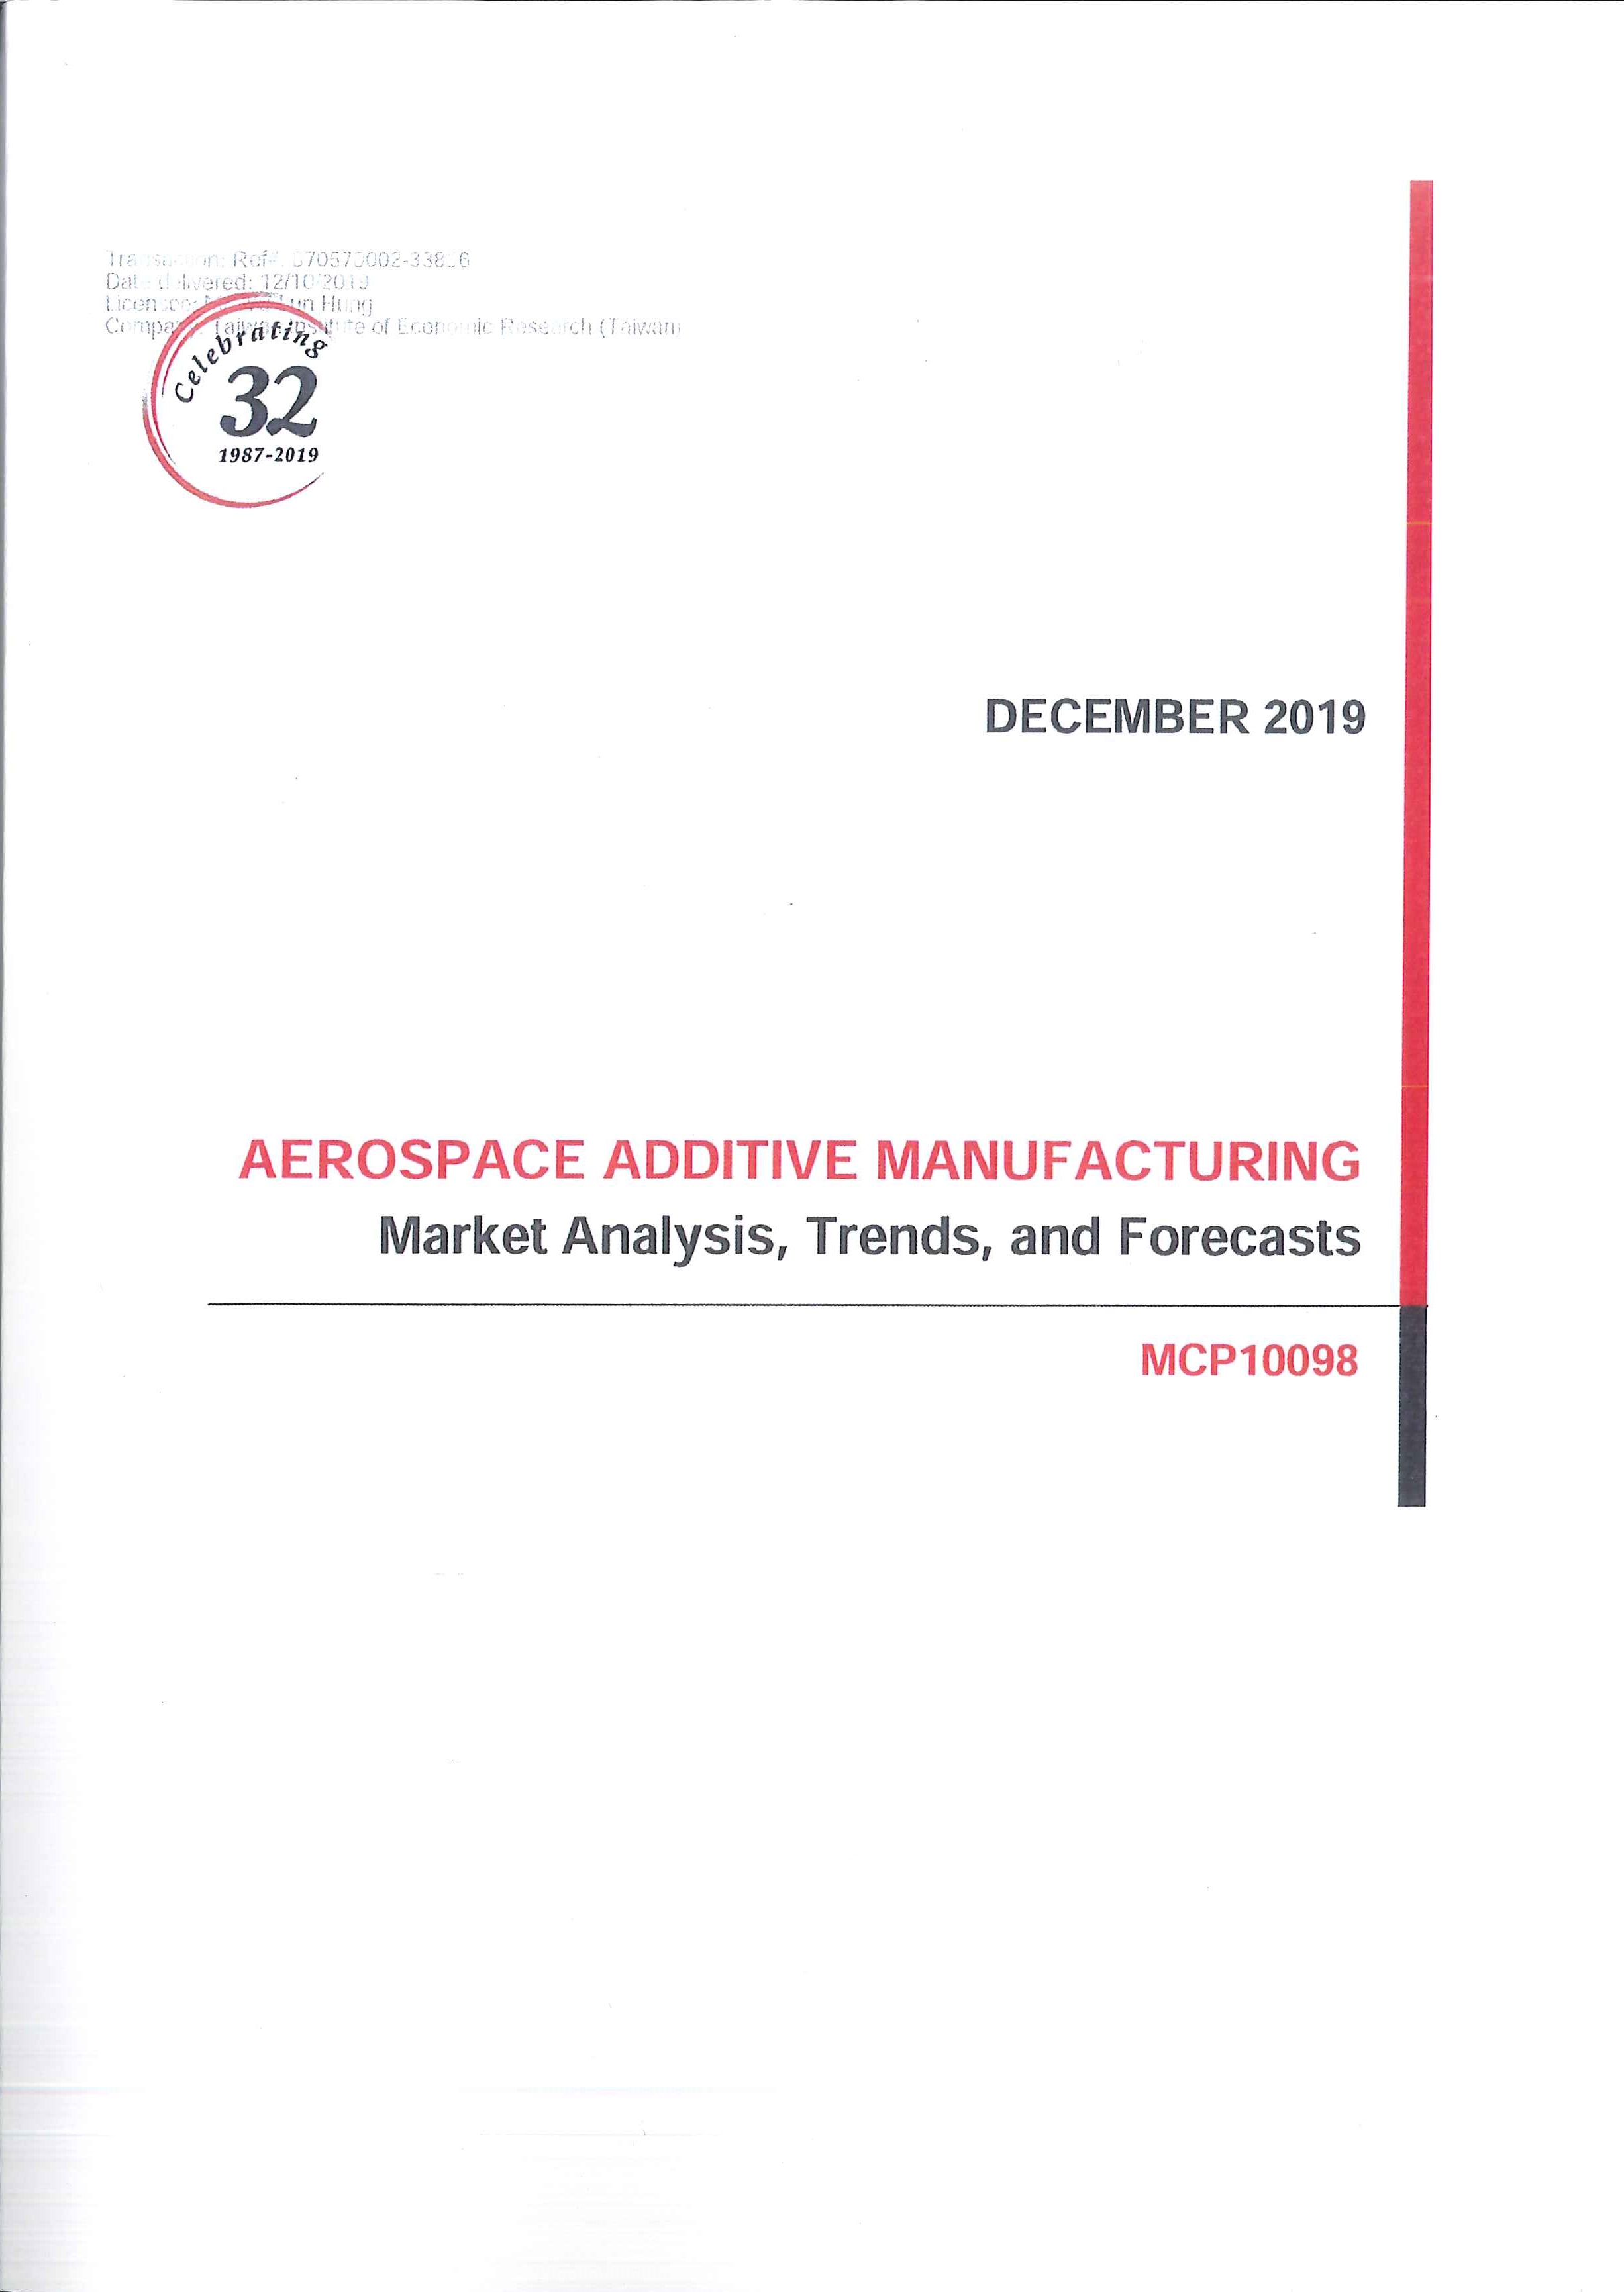 Aerospace additive manufacturing [e-book]:market analysis, trends, and forecasts